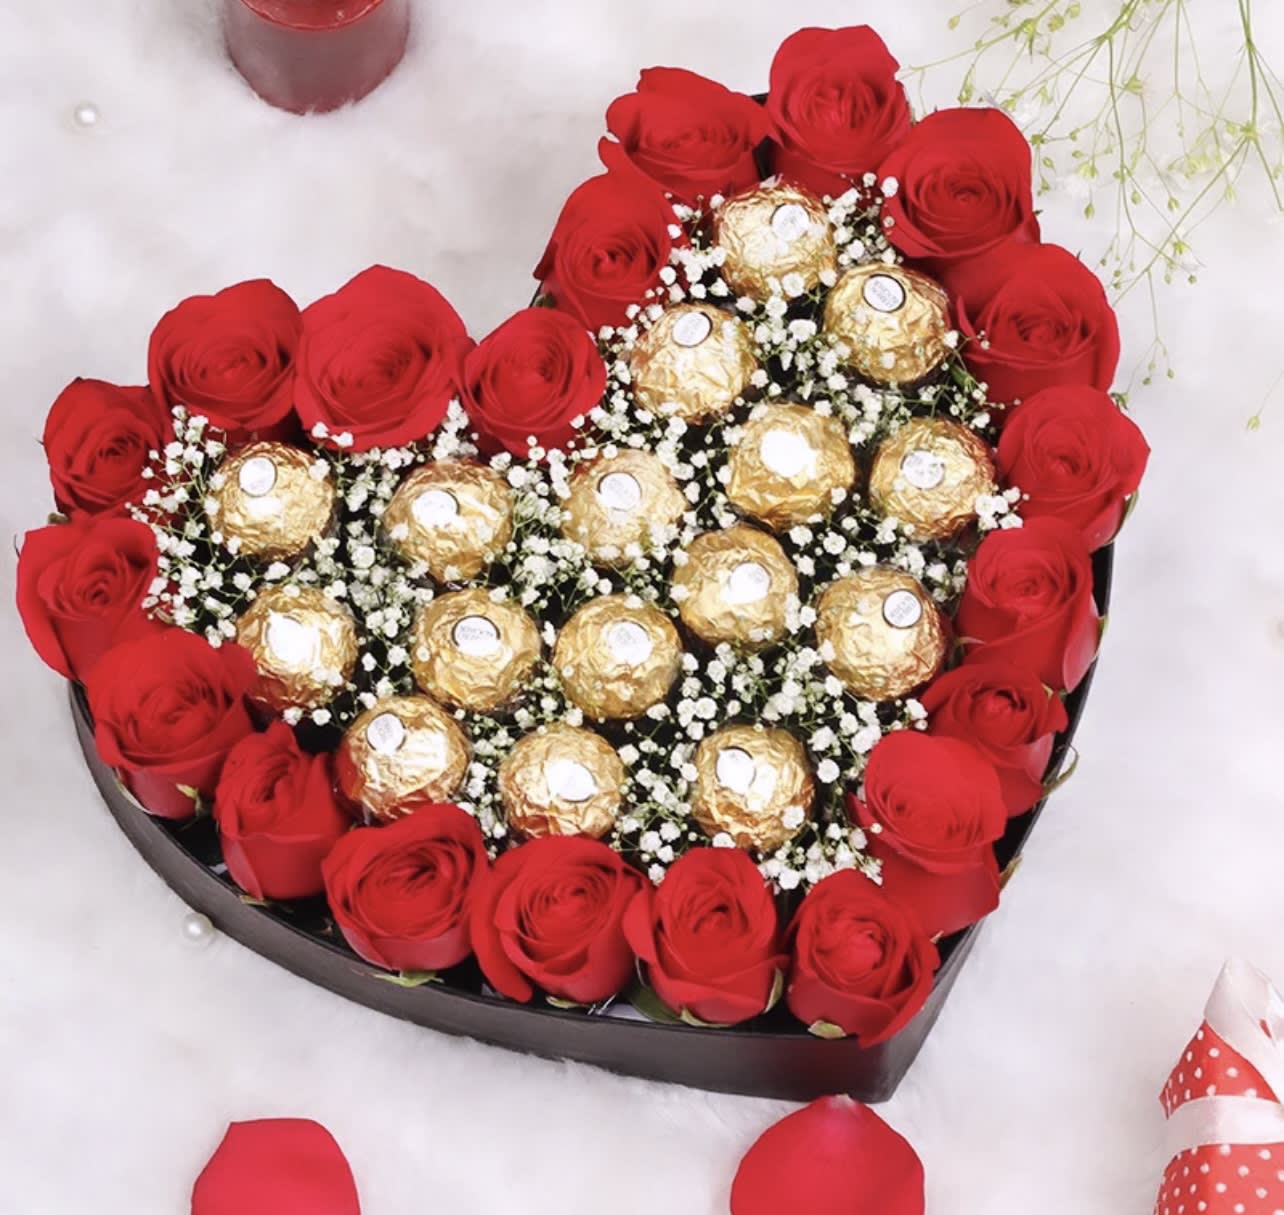 Ferrero Rocher with your roses!